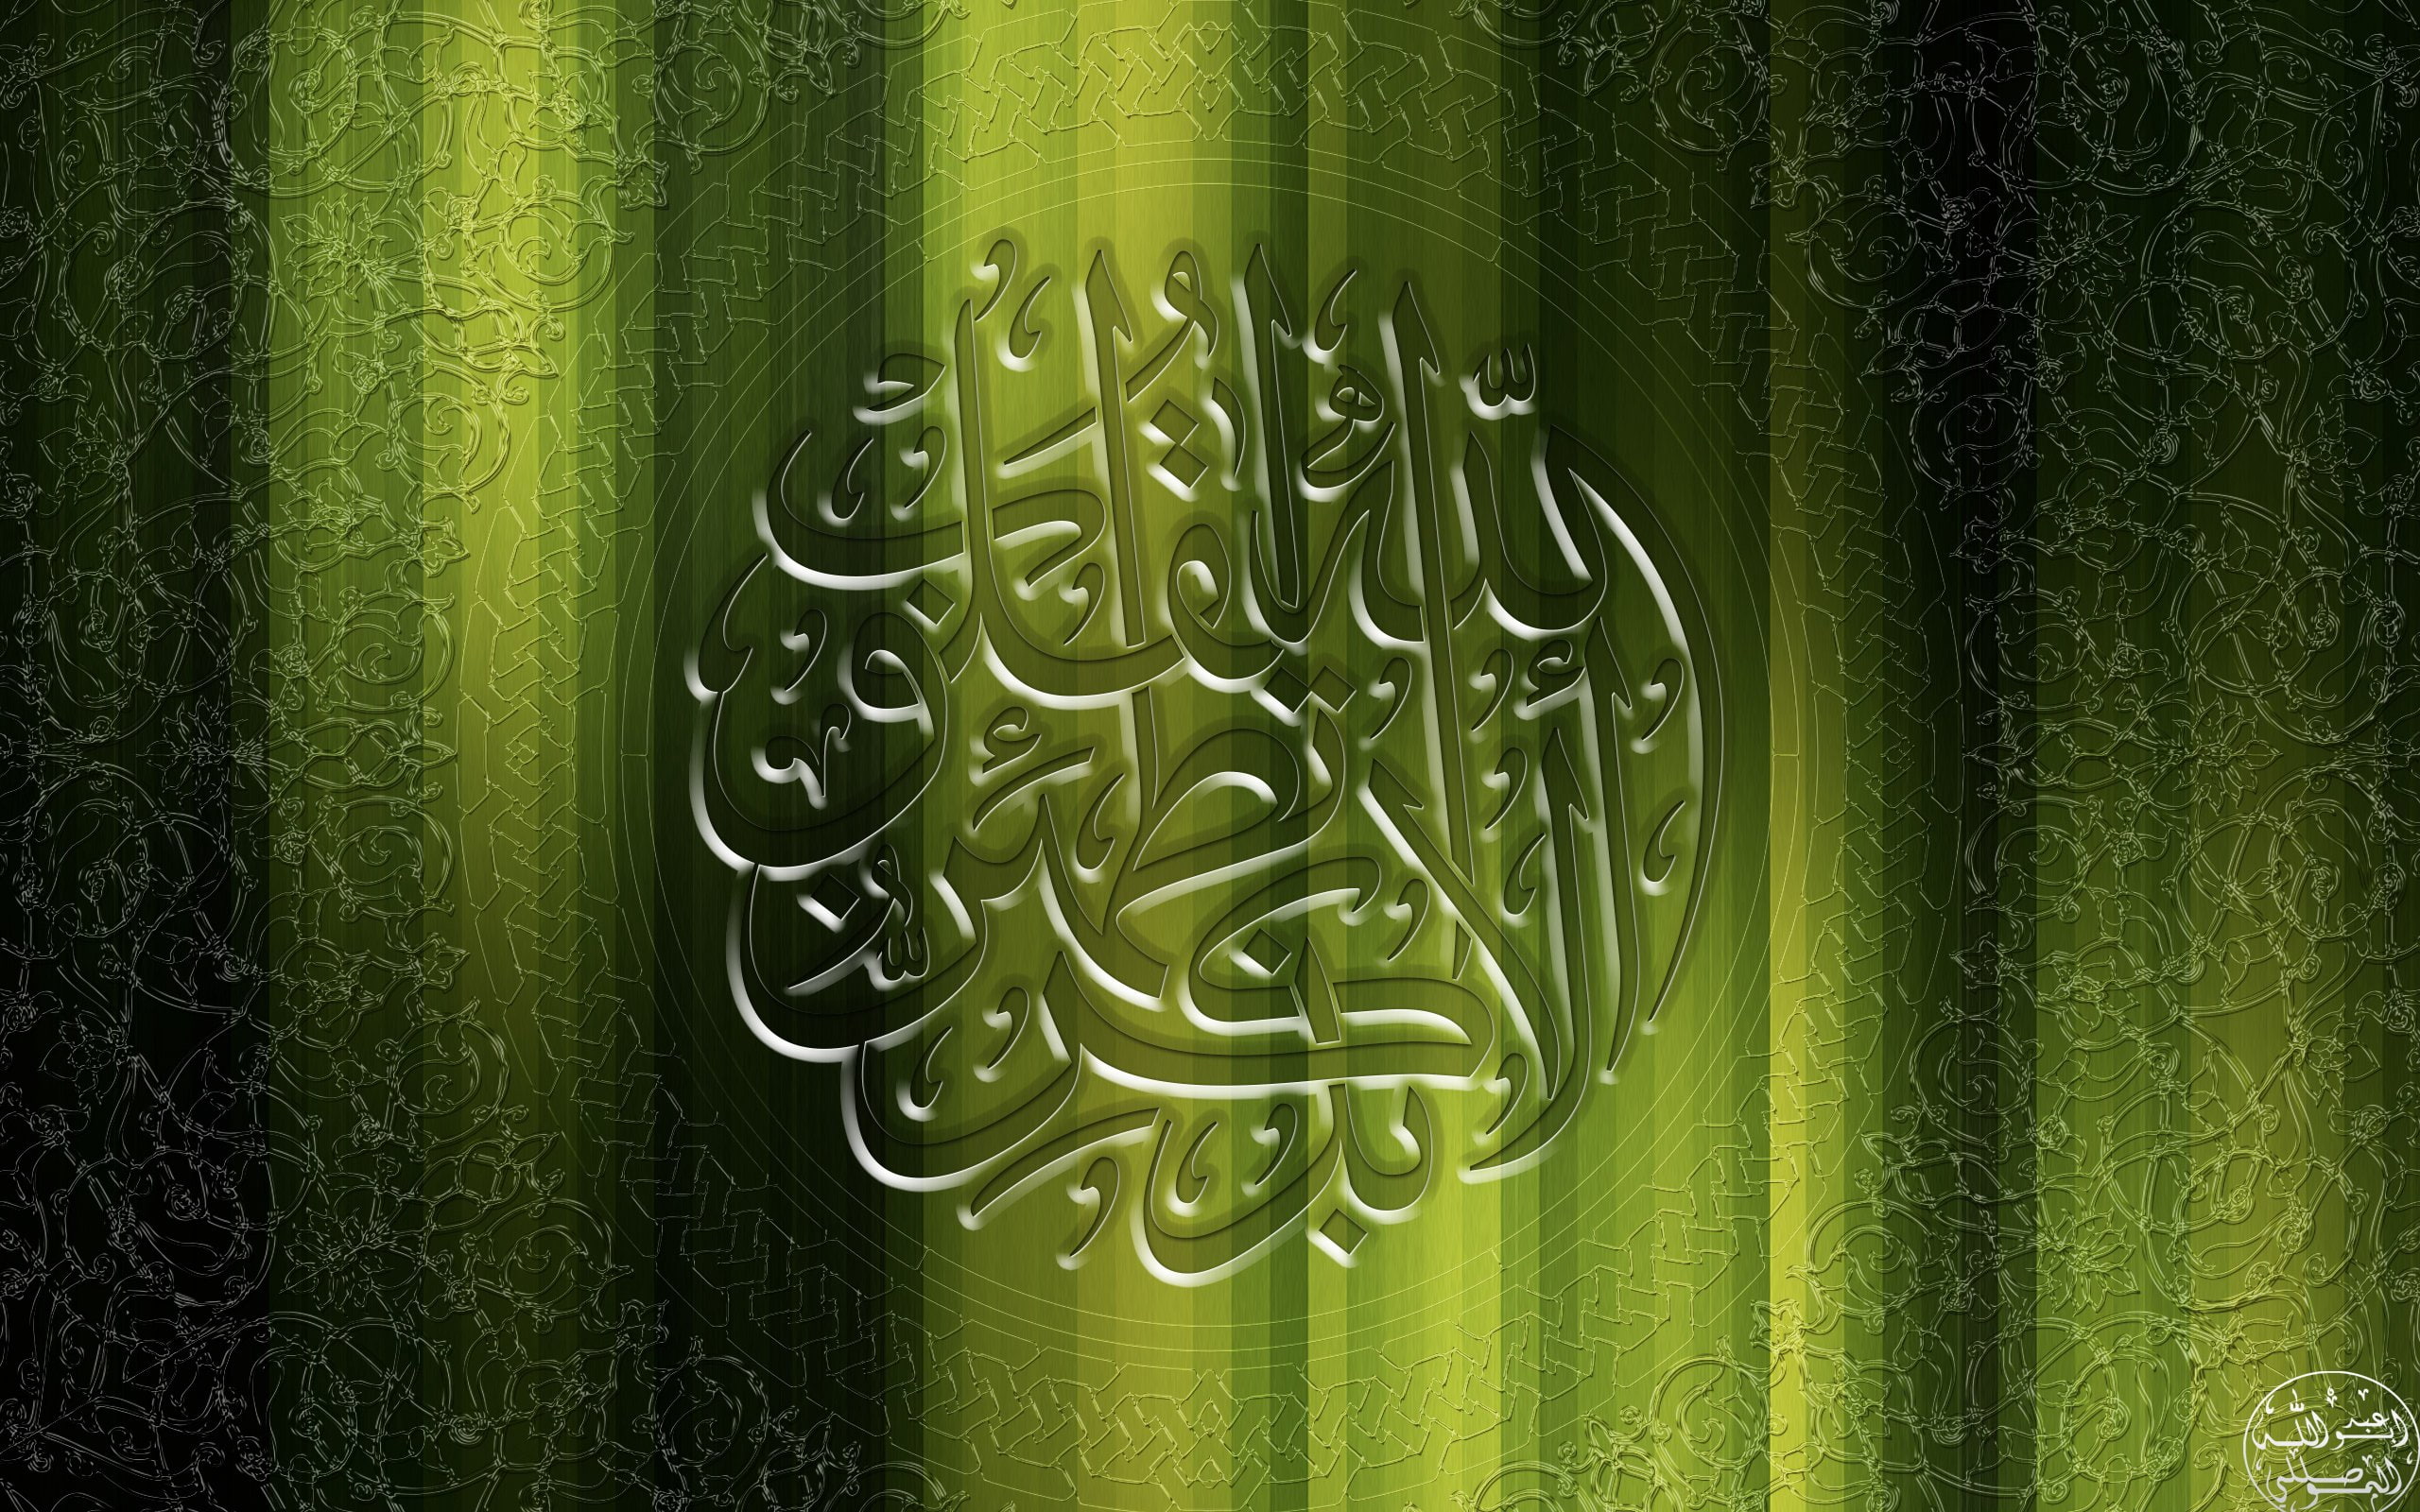 Islam, Muslim, religion, green color, no people, close-up, pattern